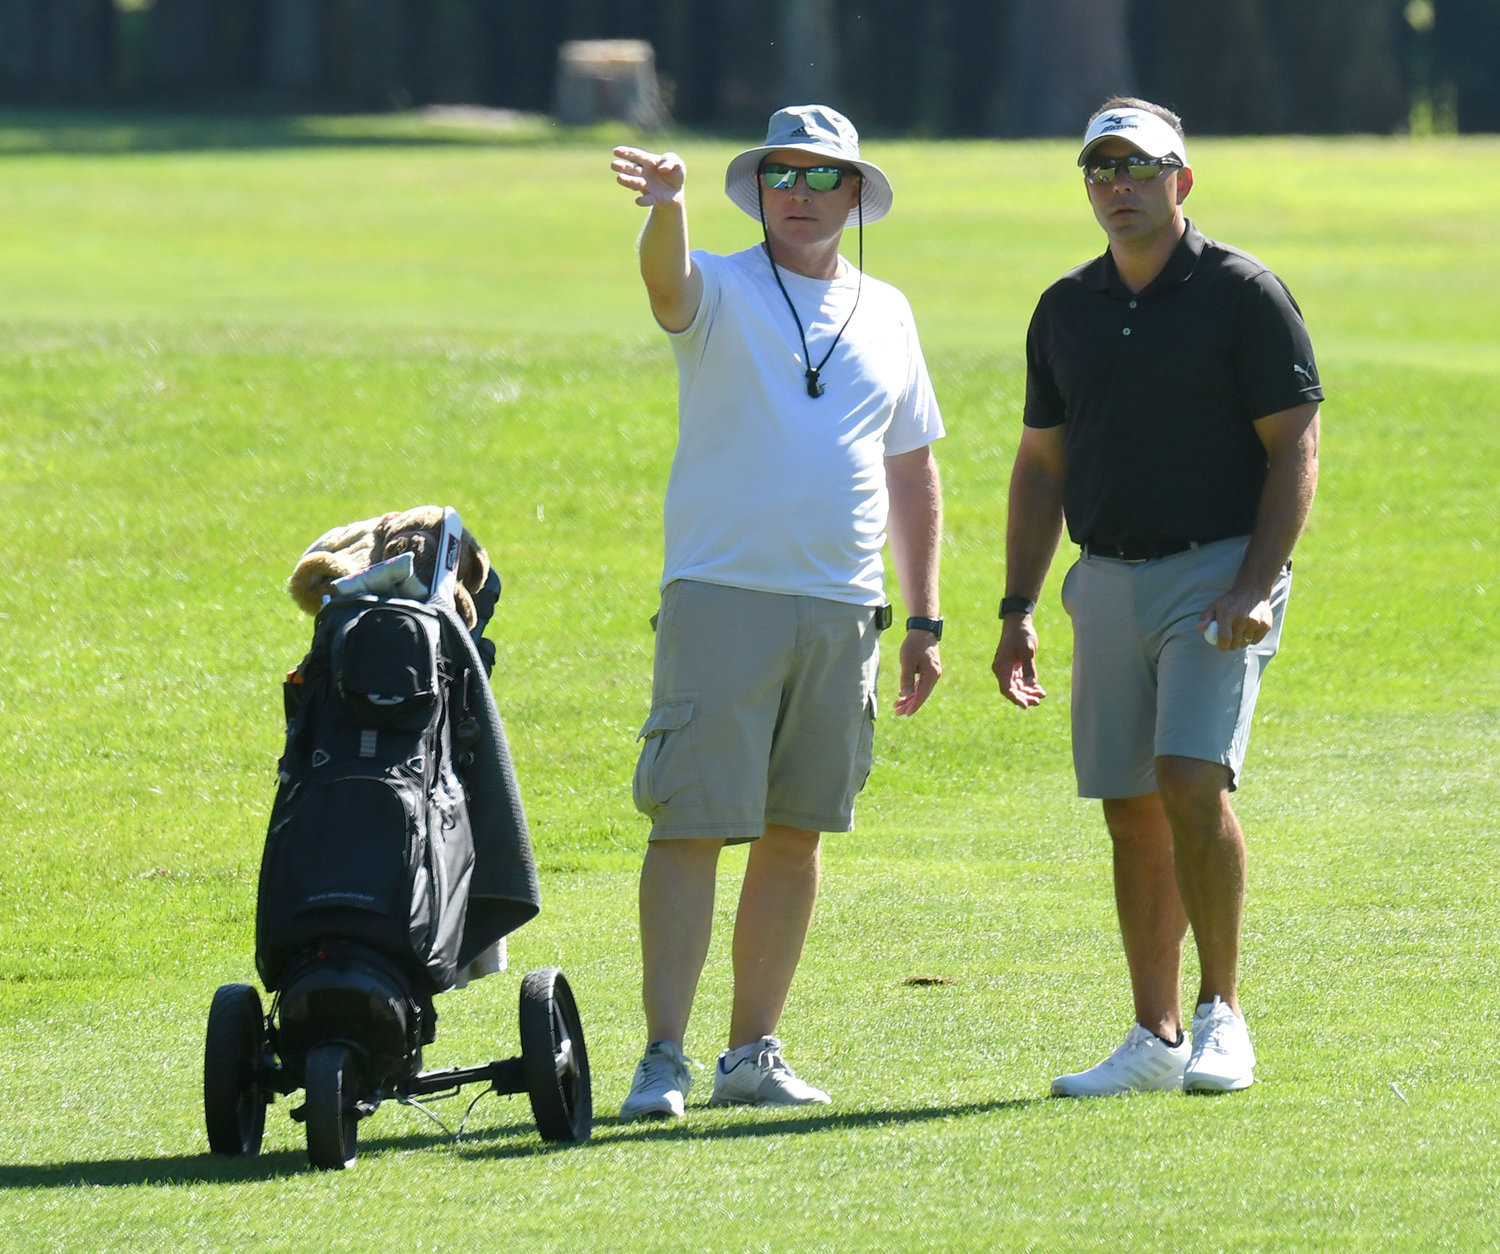 Aaron Fiorini, right, and his caddie John Zamperetti plan their approach shot on the par 5 15th hole on Sunday afternoon at McConnellsville Country Club during the final round of the Rome City Men’s Amateur Golf Championship. Fiorini finished second with a two-day score of 154. Fiorini won the 2019 city title, while Zamperetti took the crown in 2003 and 2005.